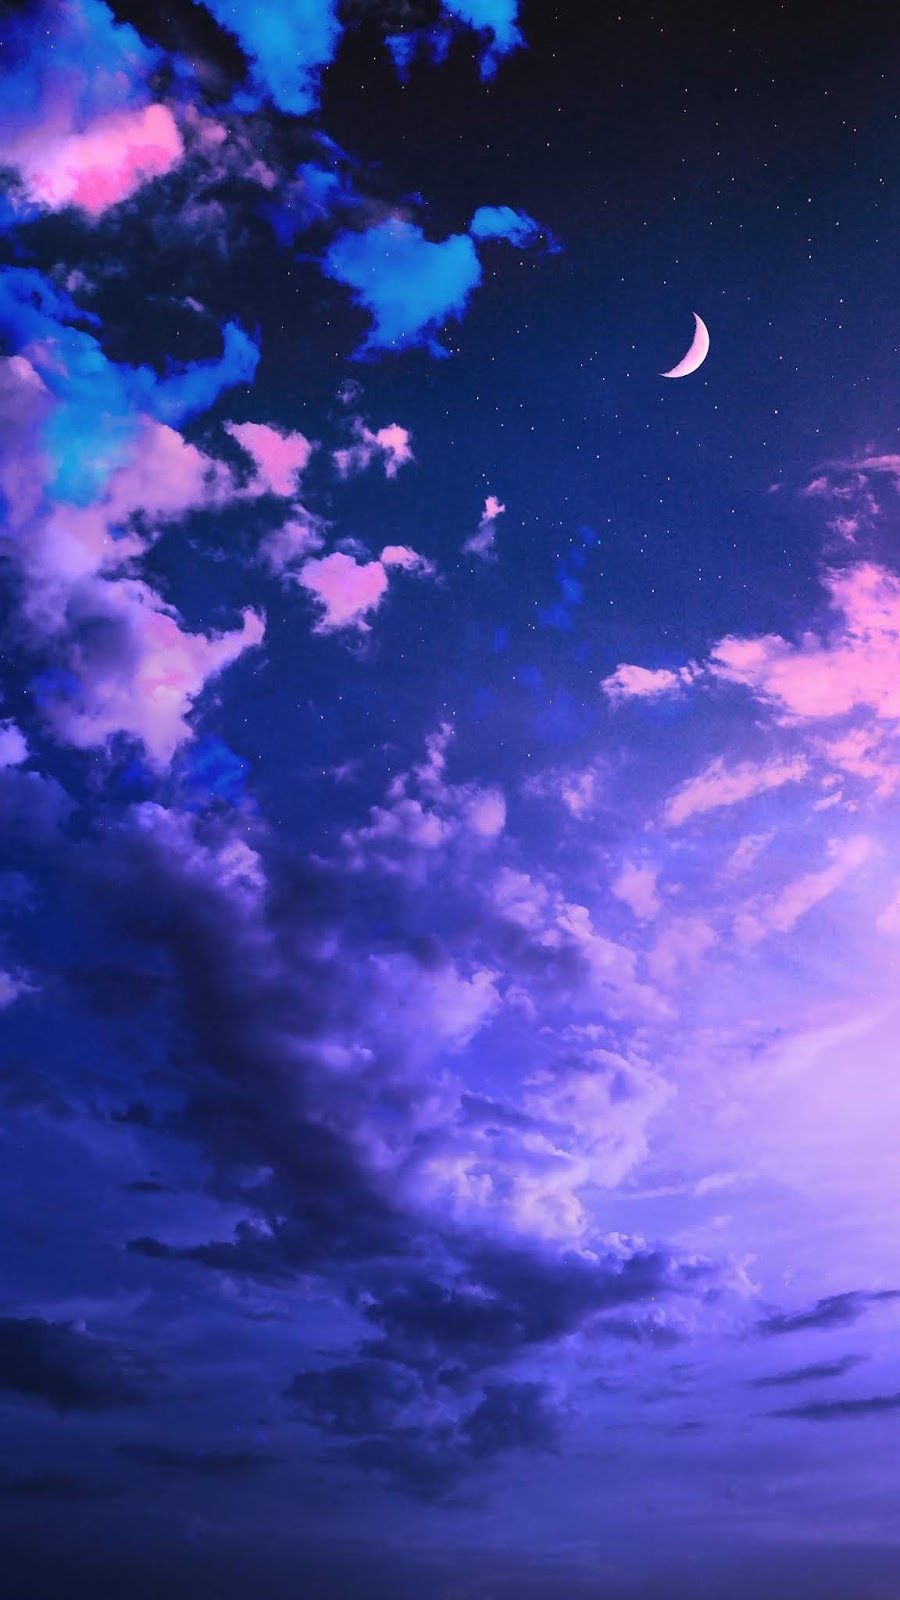 Under night sky #wallpaper #iphone #android #background #followme. Night sky wallpaper, Night skies, Sky aesthetic